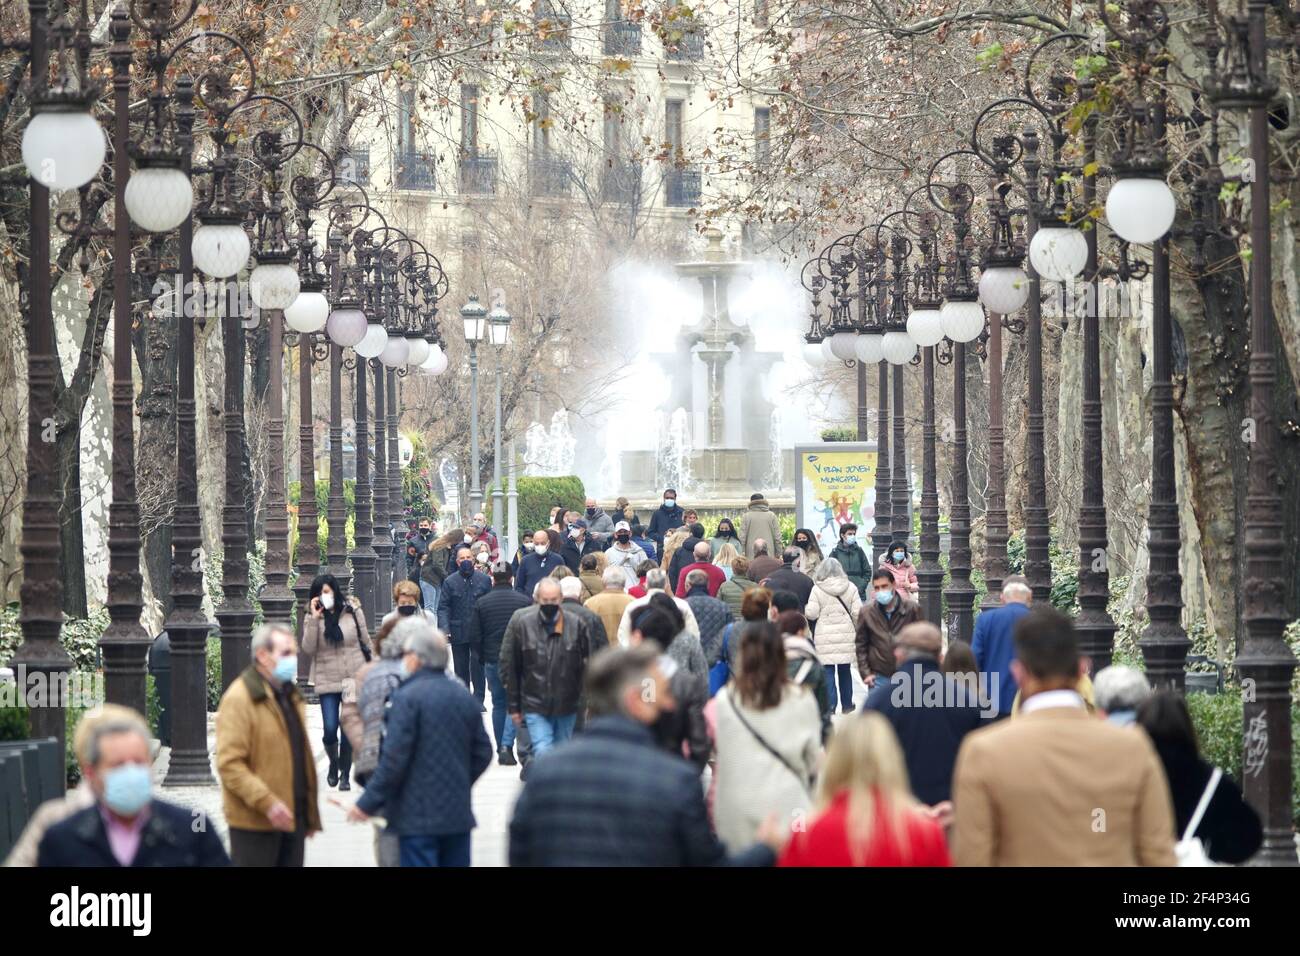 Many people with masks walking through the "Carrera de la Virgen" in Granada  (Spain), a beautiful park in the center of the city surrounded by trees  Stock Photo - Alamy